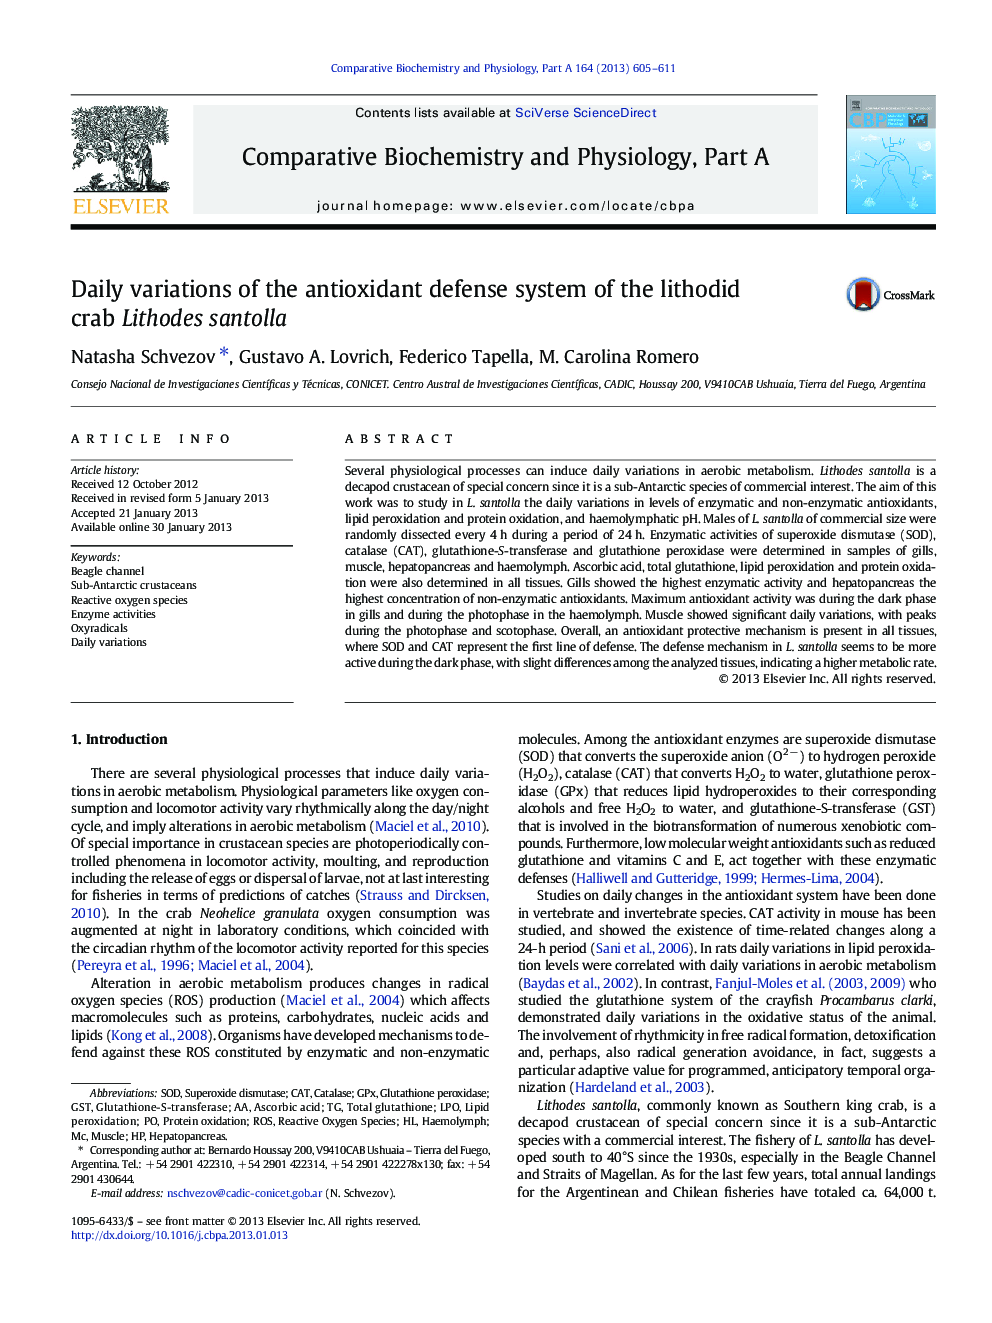 Daily variations of the antioxidant defense system of the lithodid crab Lithodes santolla